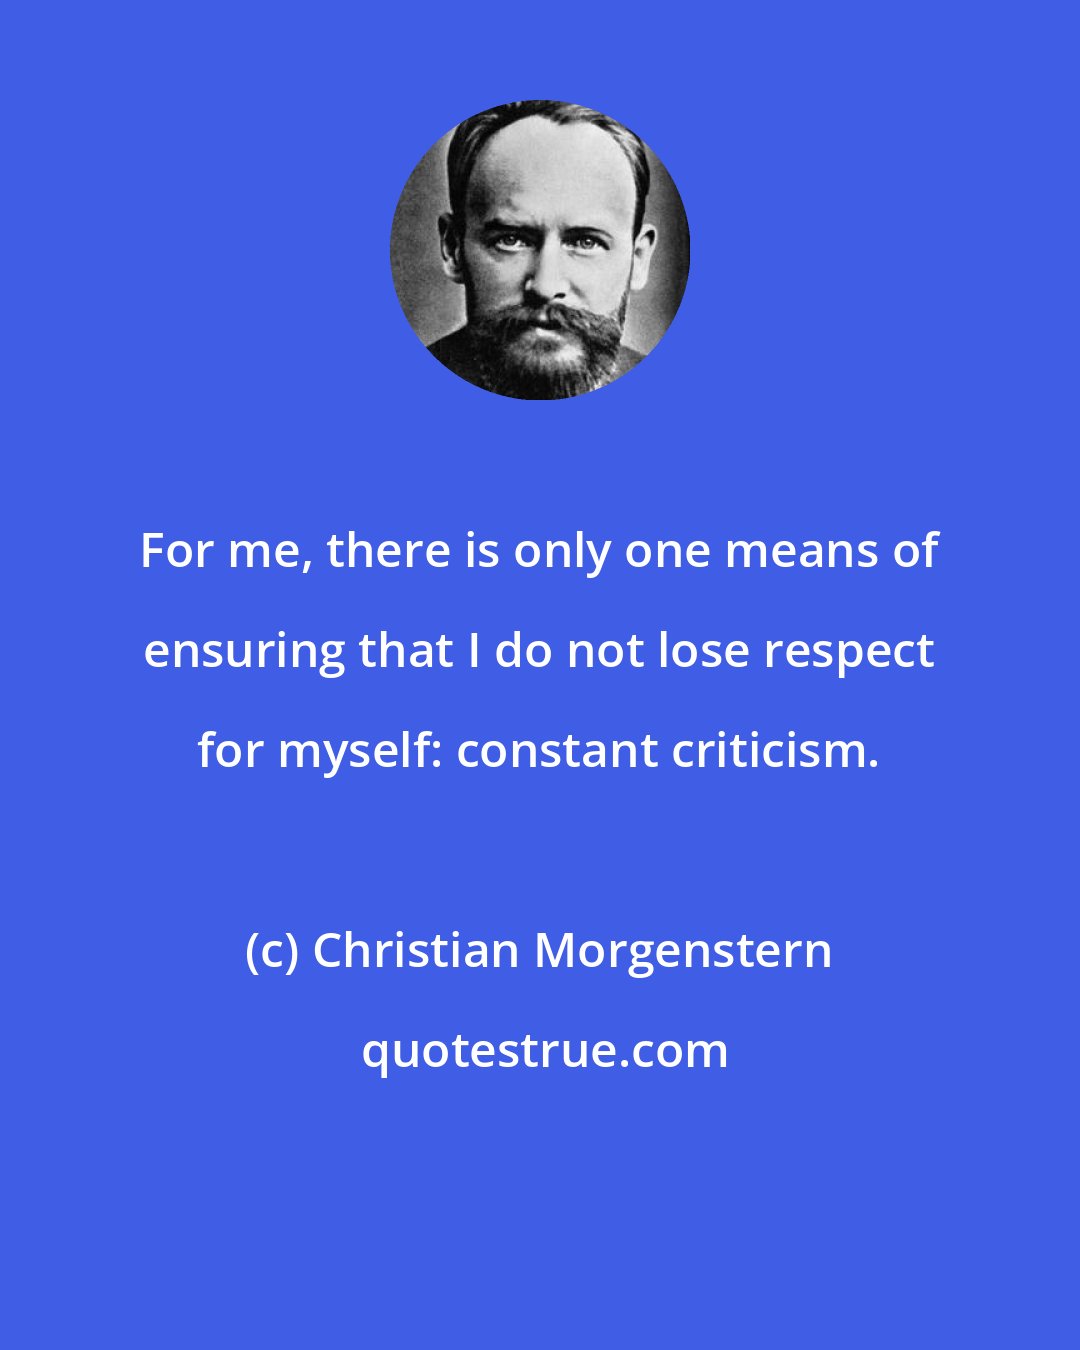 Christian Morgenstern: For me, there is only one means of ensuring that I do not lose respect for myself: constant criticism.